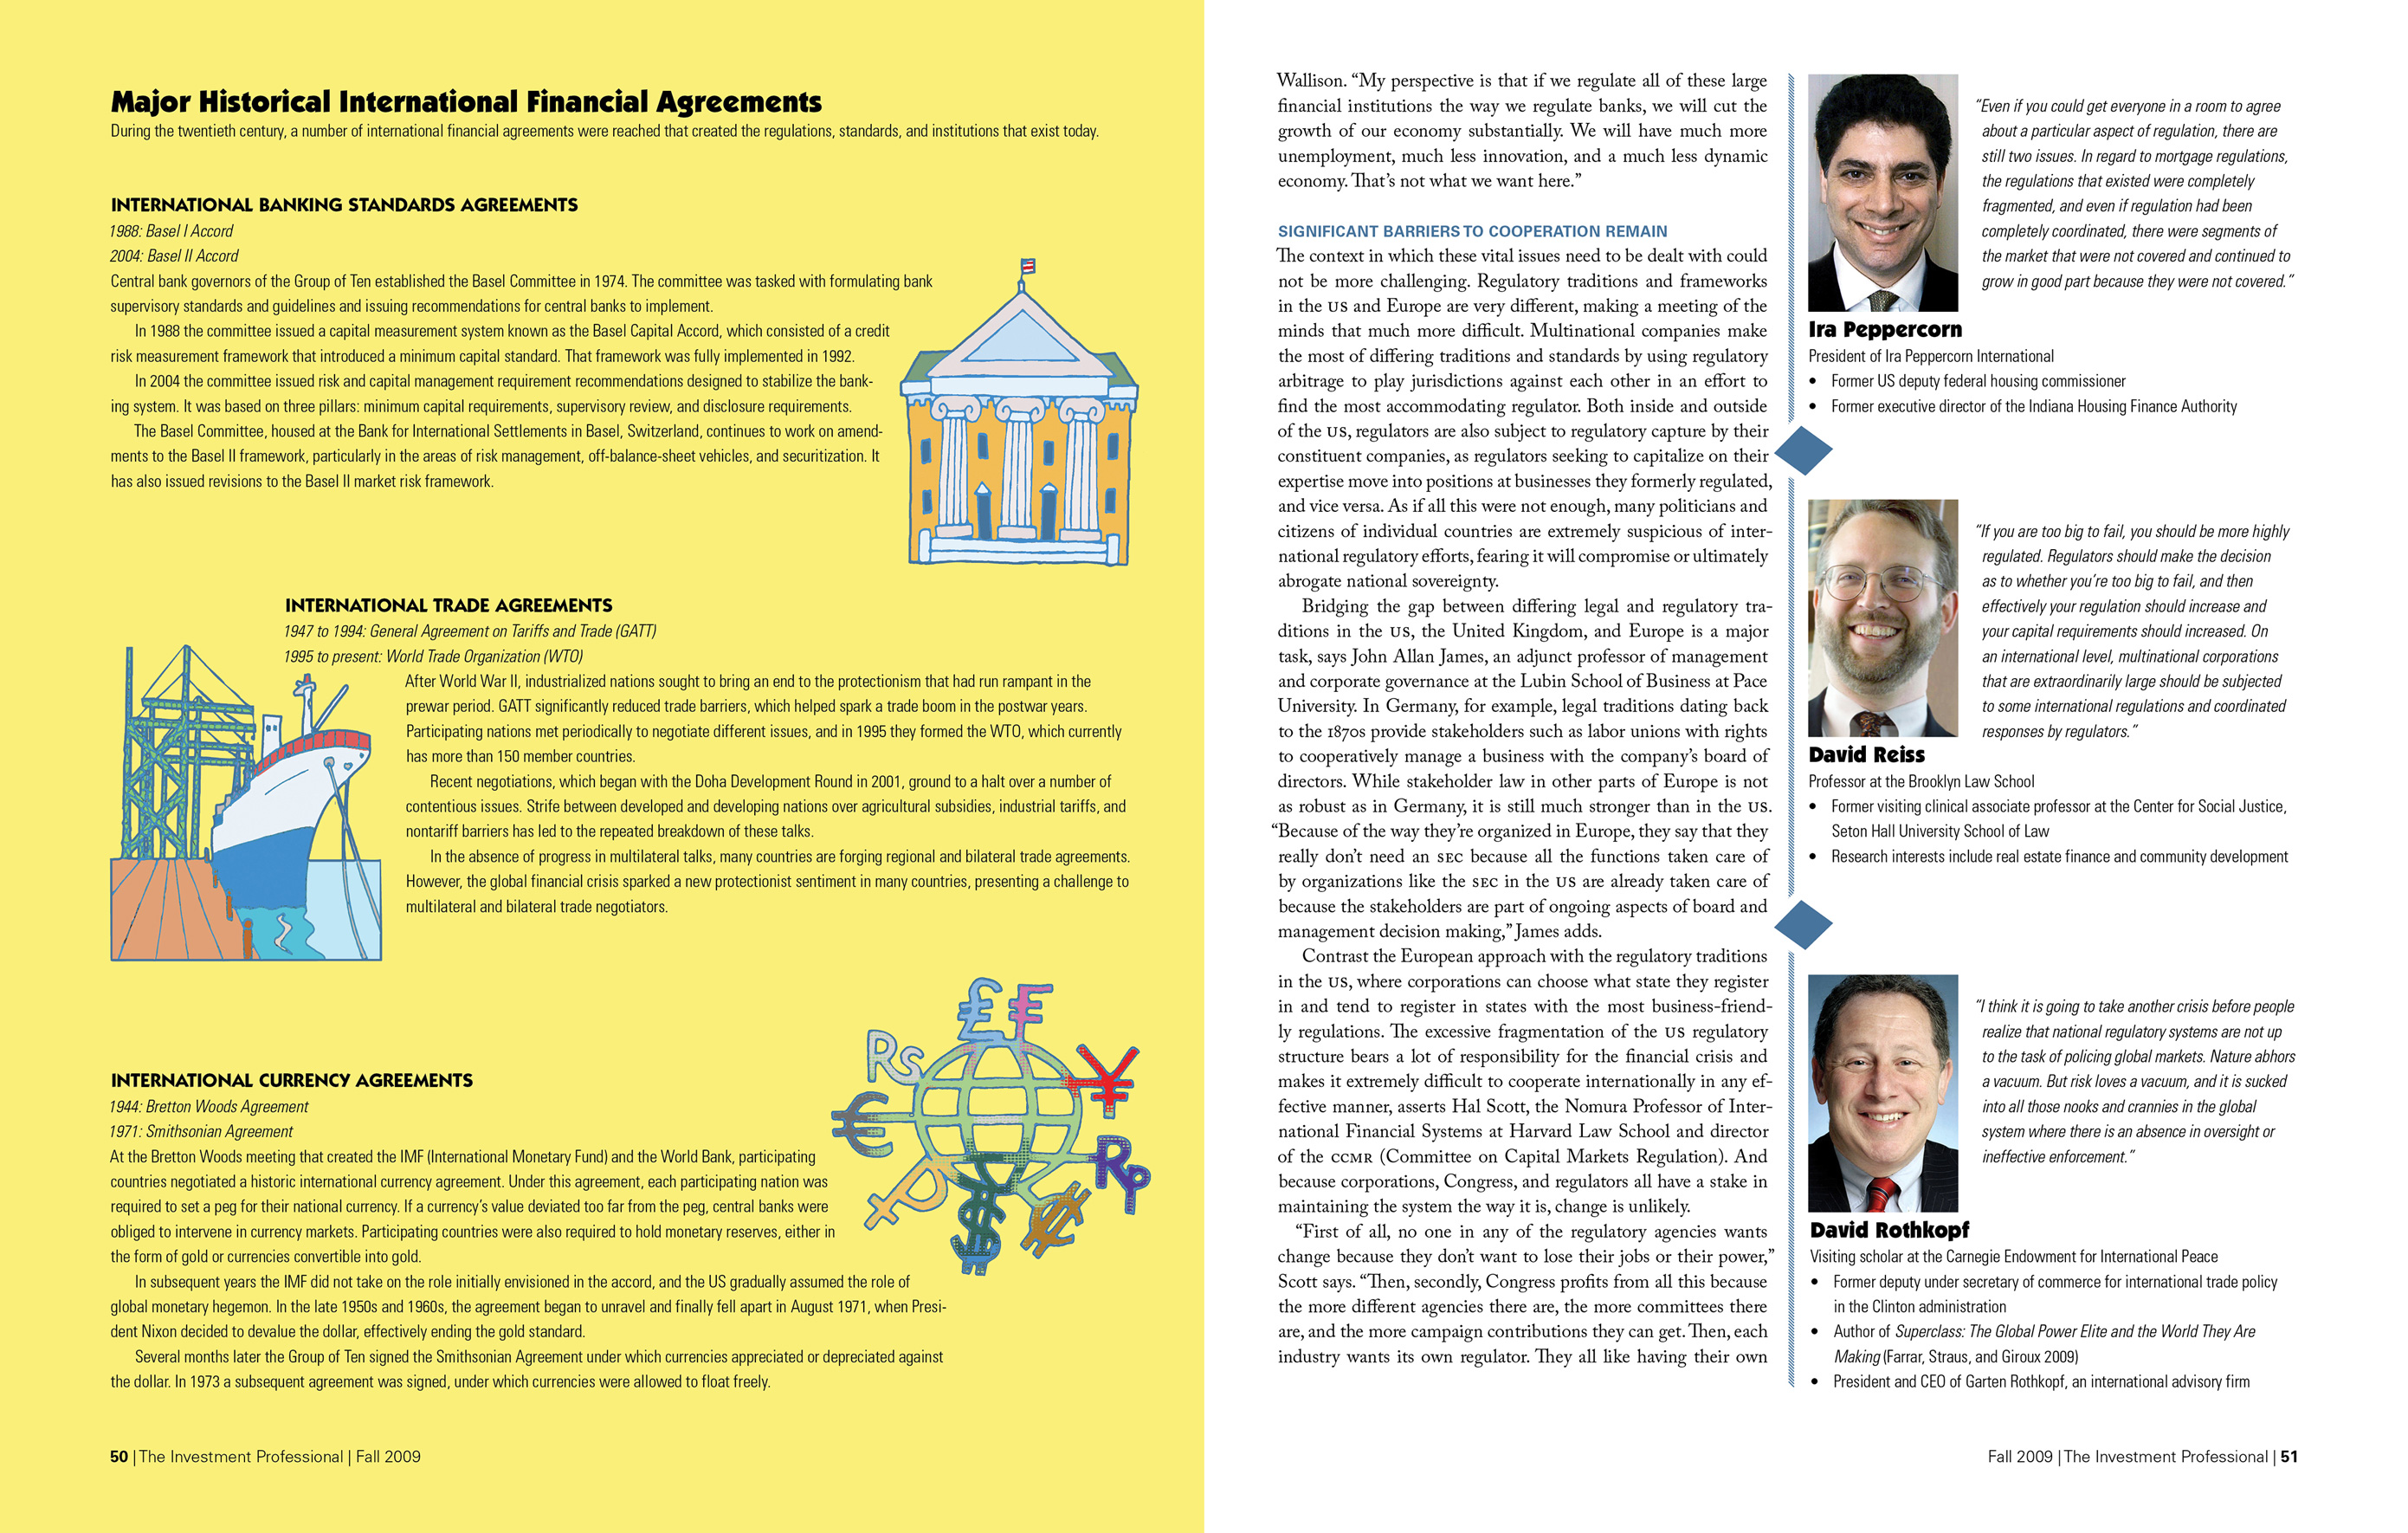 Fourth spread of the article titled 'Mending the Seams,' including headshots of and quotes from experts: Ira Peppercorn of Ira Peppercorn International; David Reiss of Brooklyn Law School; and David Rothkopf of Carnegie Endowment for International Peace. A sidebar describes historical international agreeements on banking standards, trade, and currency. There are three accompanying illustrations: a bank, a shipping vessel, and a globe surrounded by currency symbols, respectively.